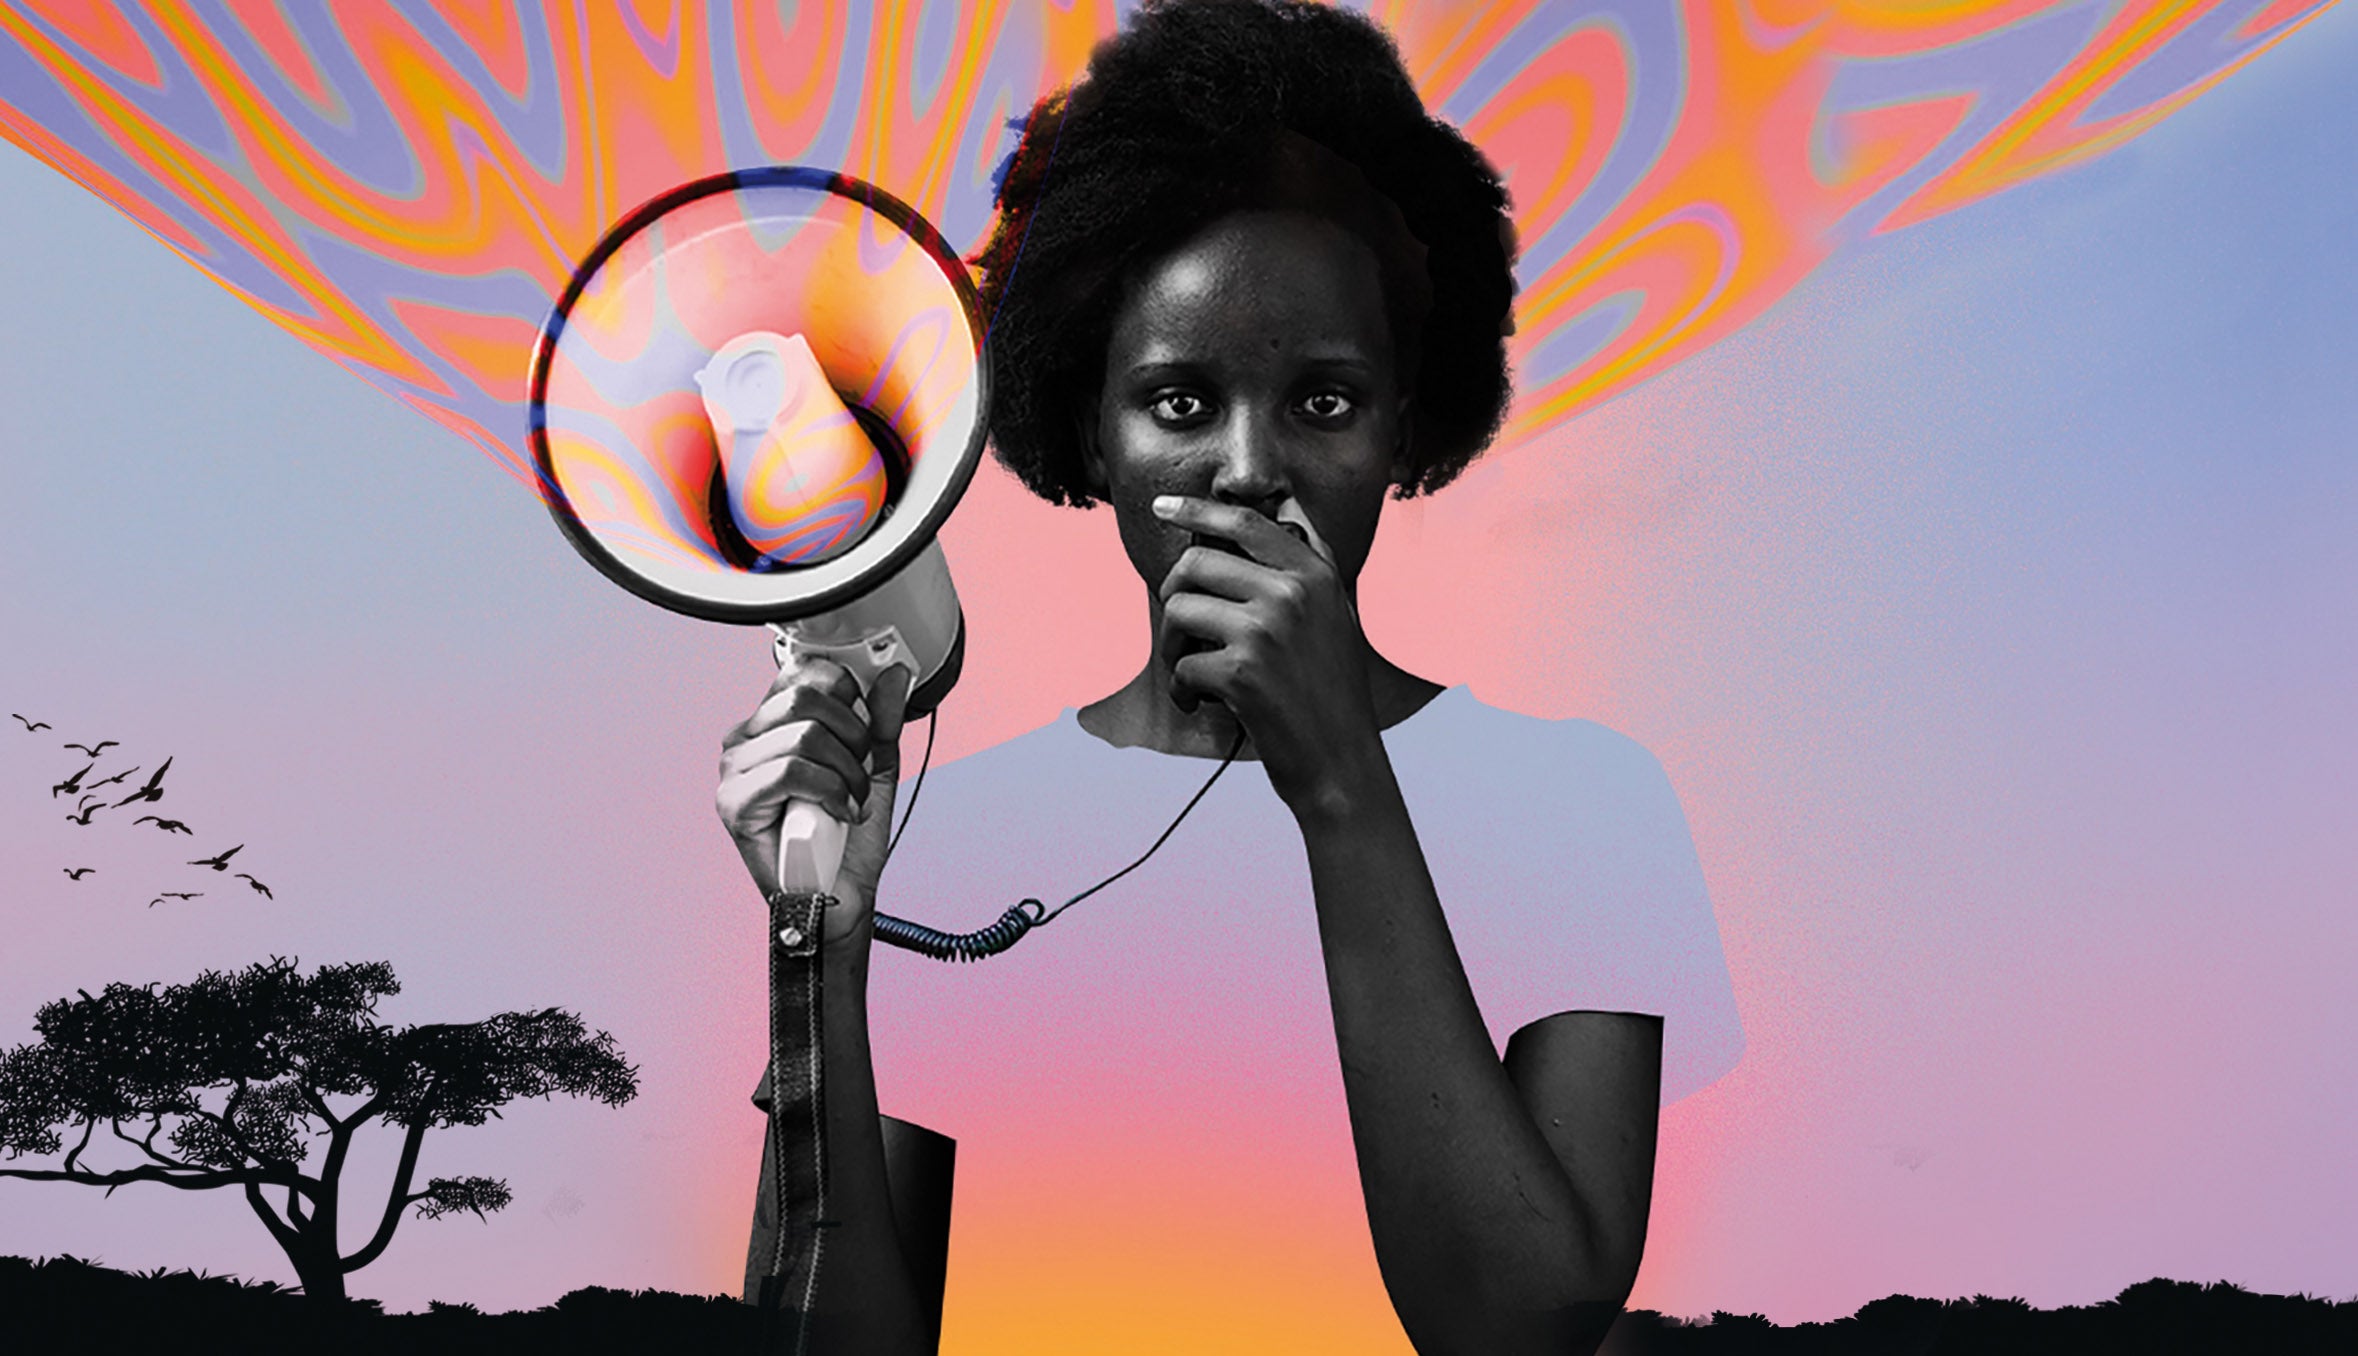 A cropped cover image from A Bigger Picture, a girl shouts from a megaphone in an African landscape